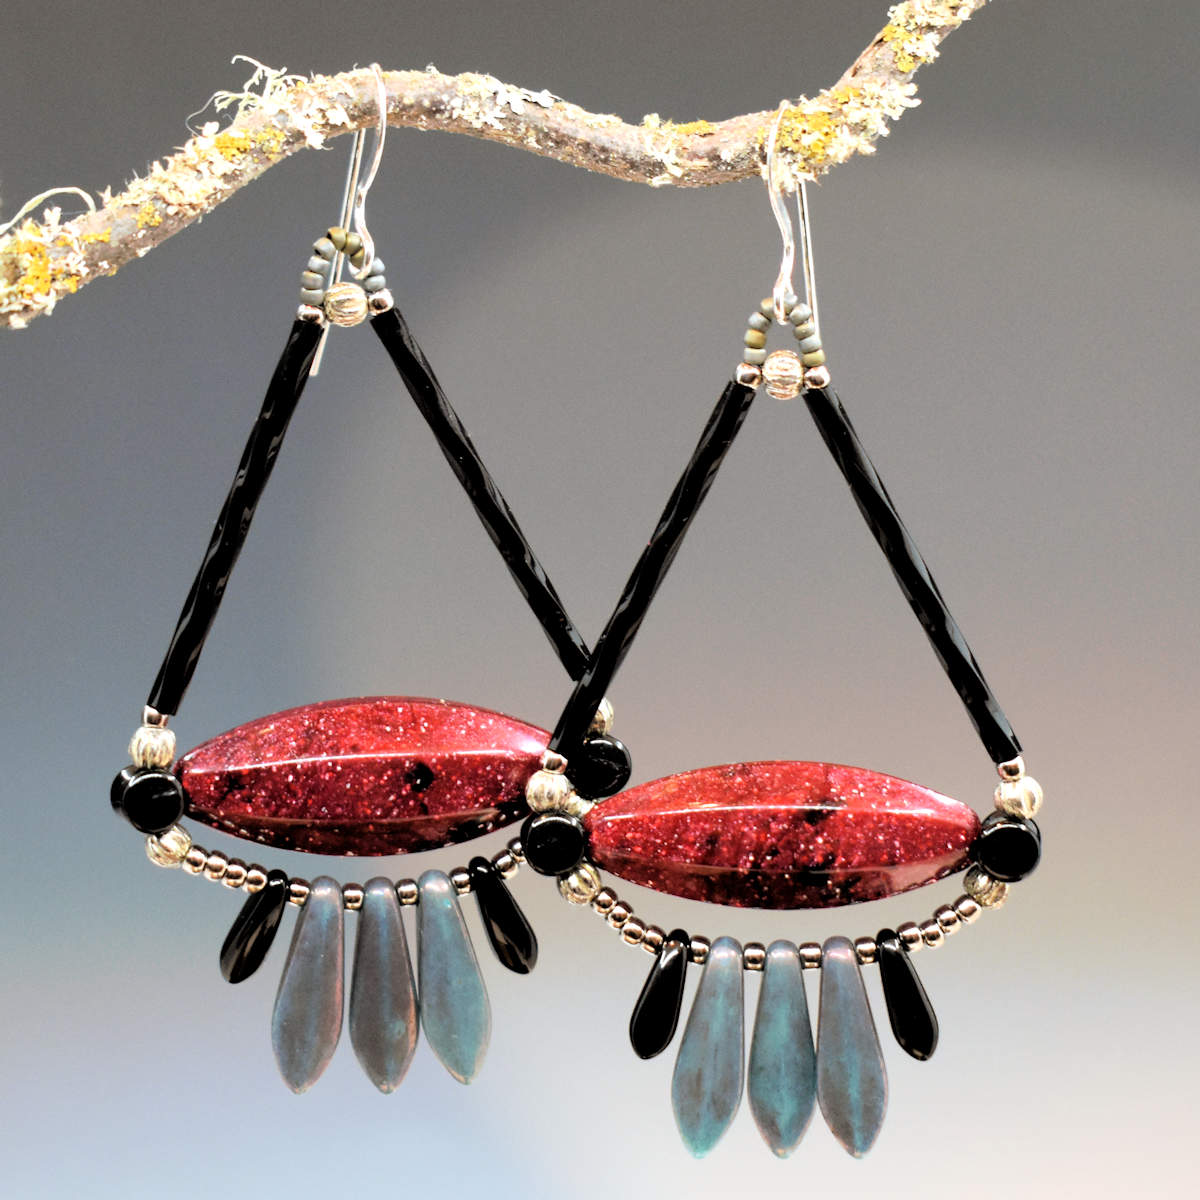 Wide triangular earrings with long black tubes at the top and a base of long, speckled, pointed oval beads hang from a twig. The earrings have silver wires, and below the bottom of the triangle shaped part of the earring is a fringe of five dagger beads, three mottled gray-blue in the center and smaller black beads on either side. 